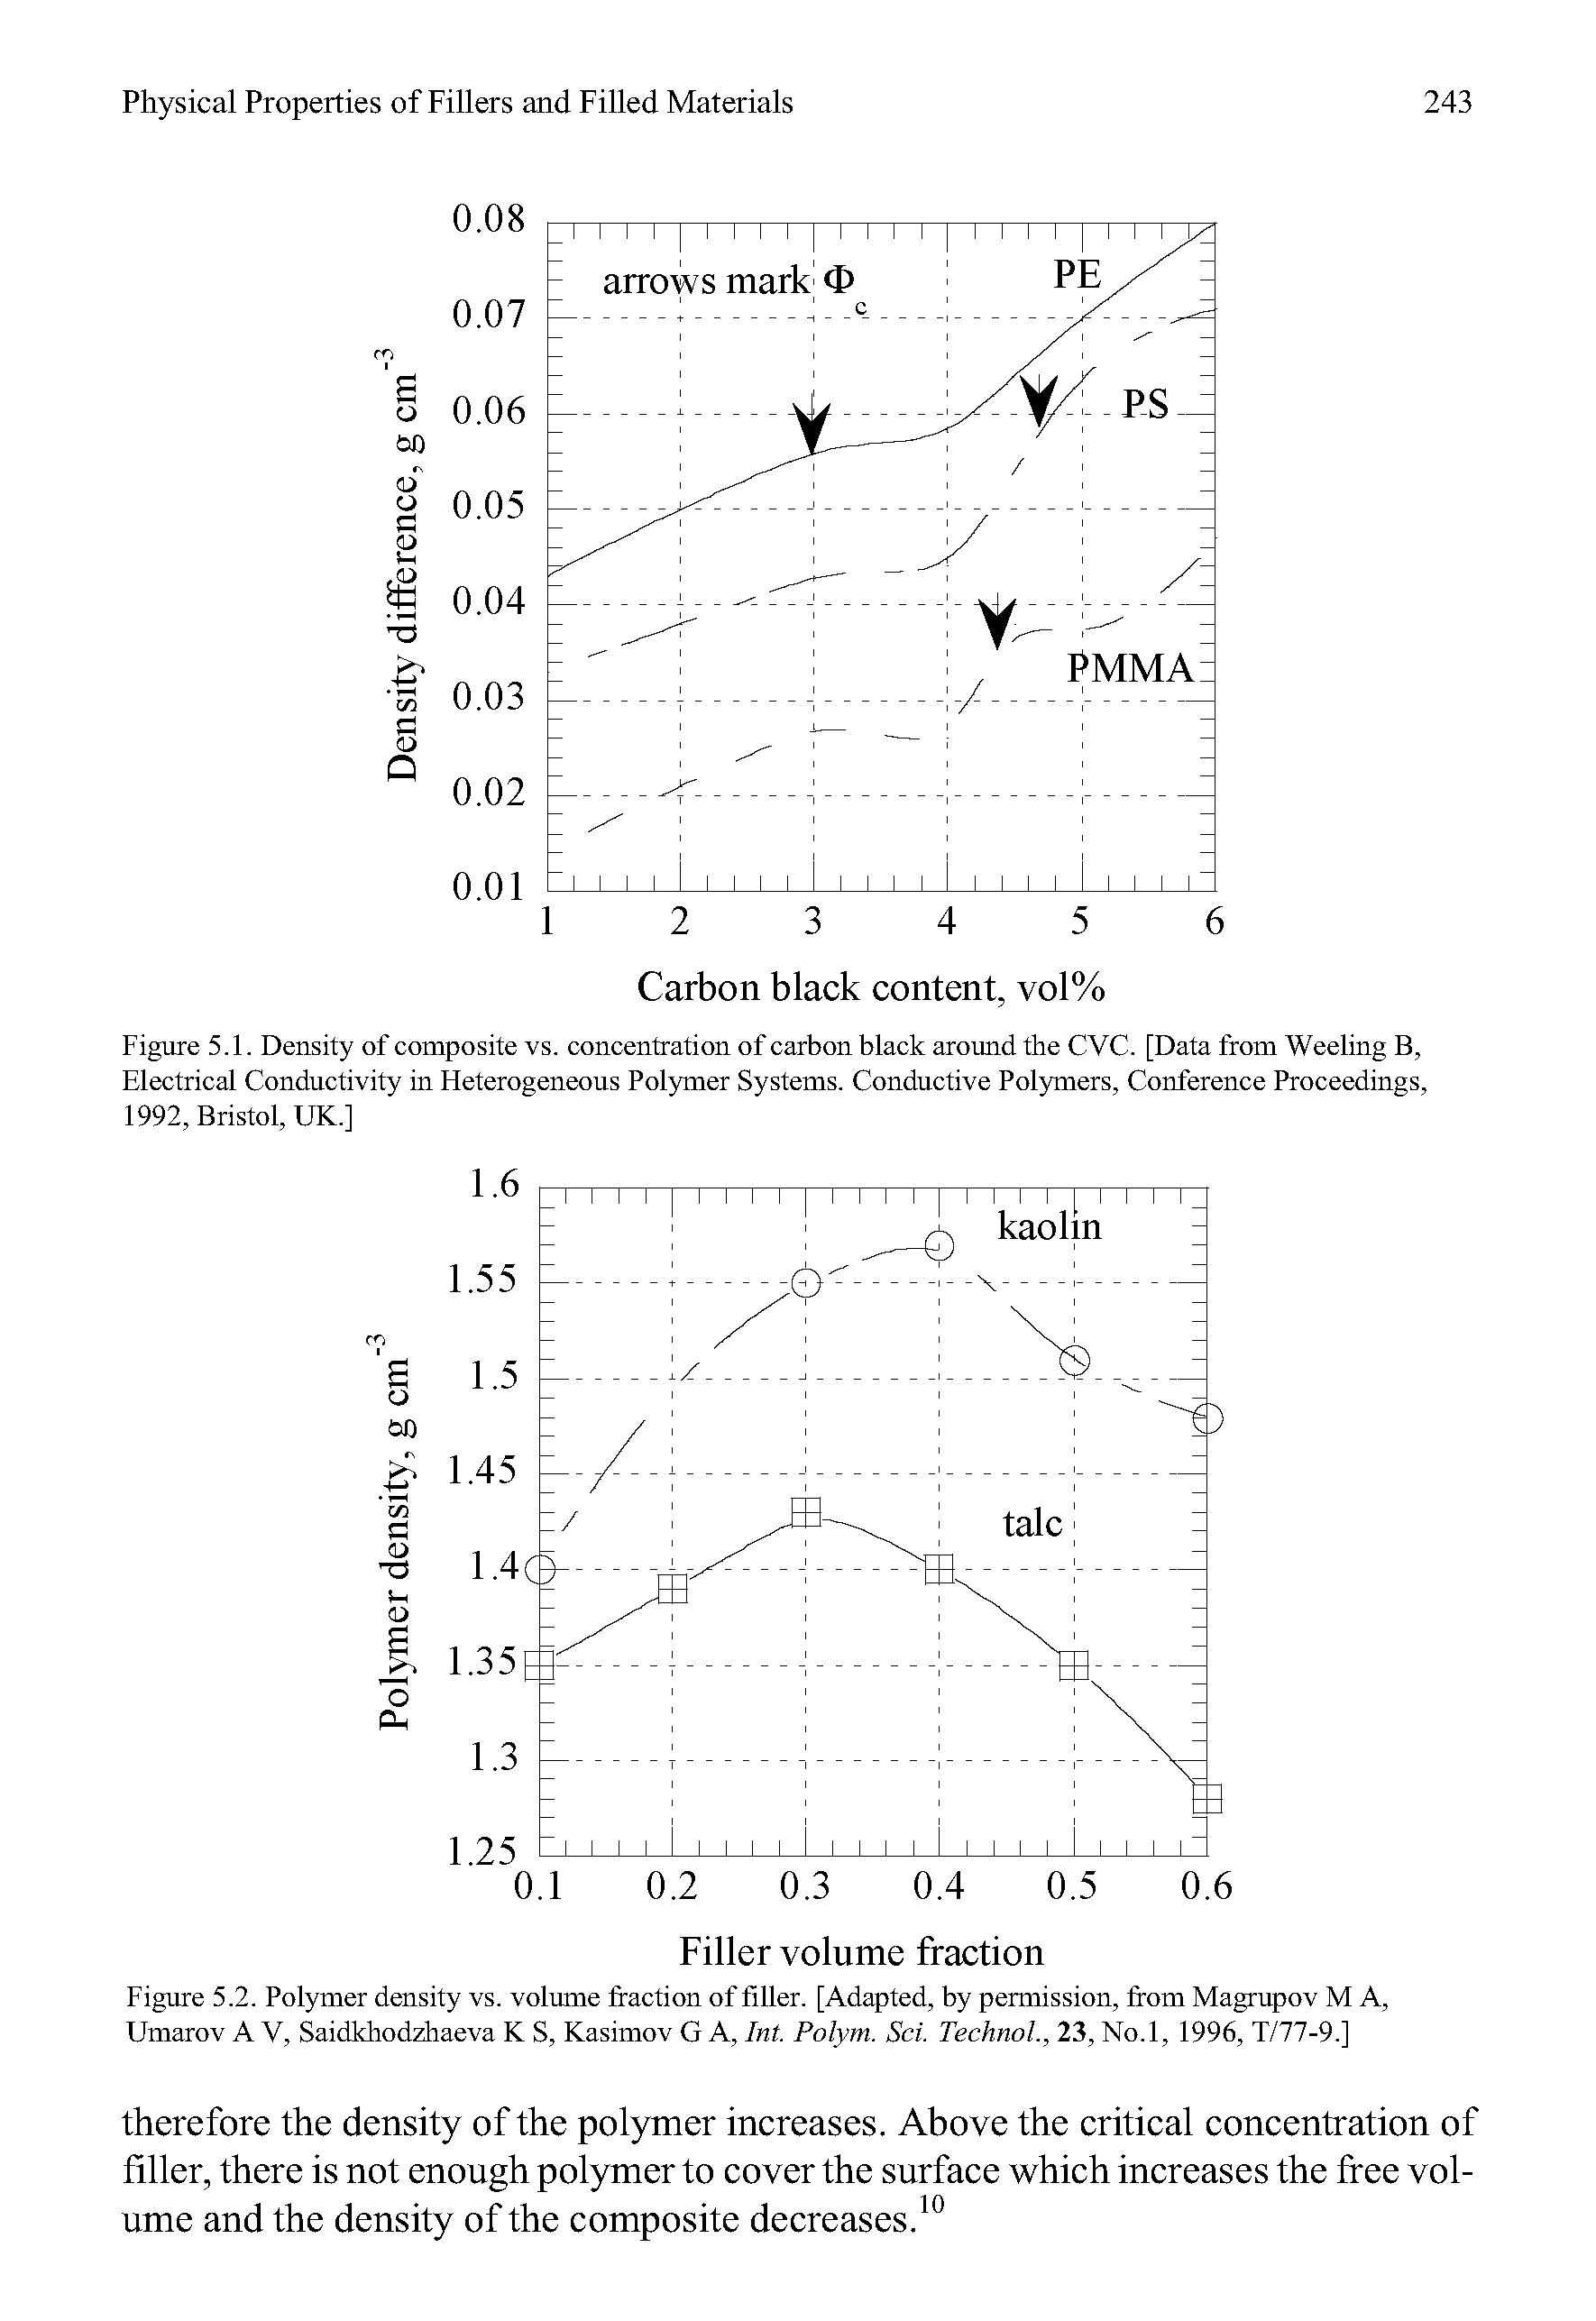 Figure 5.1. Density of composite vs. concentration of carbon black around the CVC. [Data from Weeling B, Electrical Conductivity in Heterogeneous Polymer Systems. Conductive Polymers, Conference Proceedings, 1992, Bristol, UK.]...